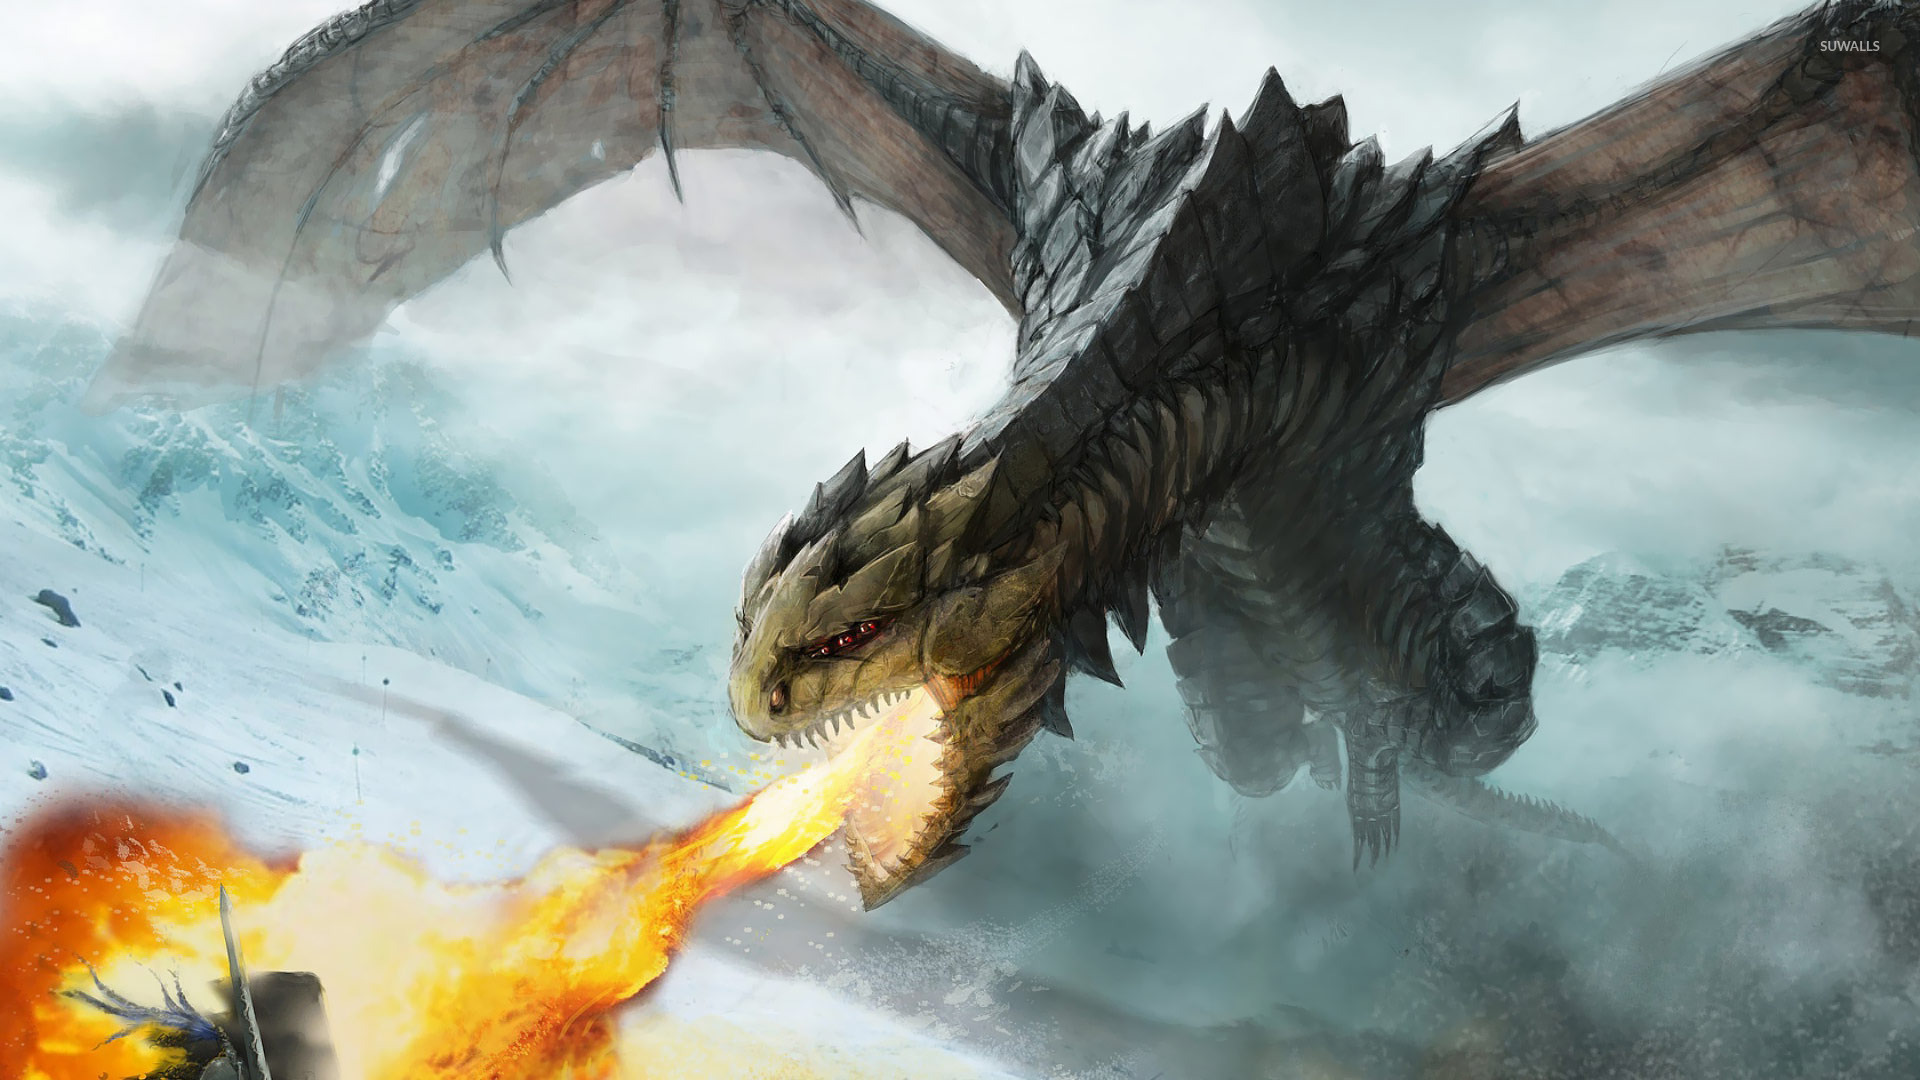 What is the title of this picture ? Fire breathing dragon wallpaper - Fantasy wallpapers - #19078